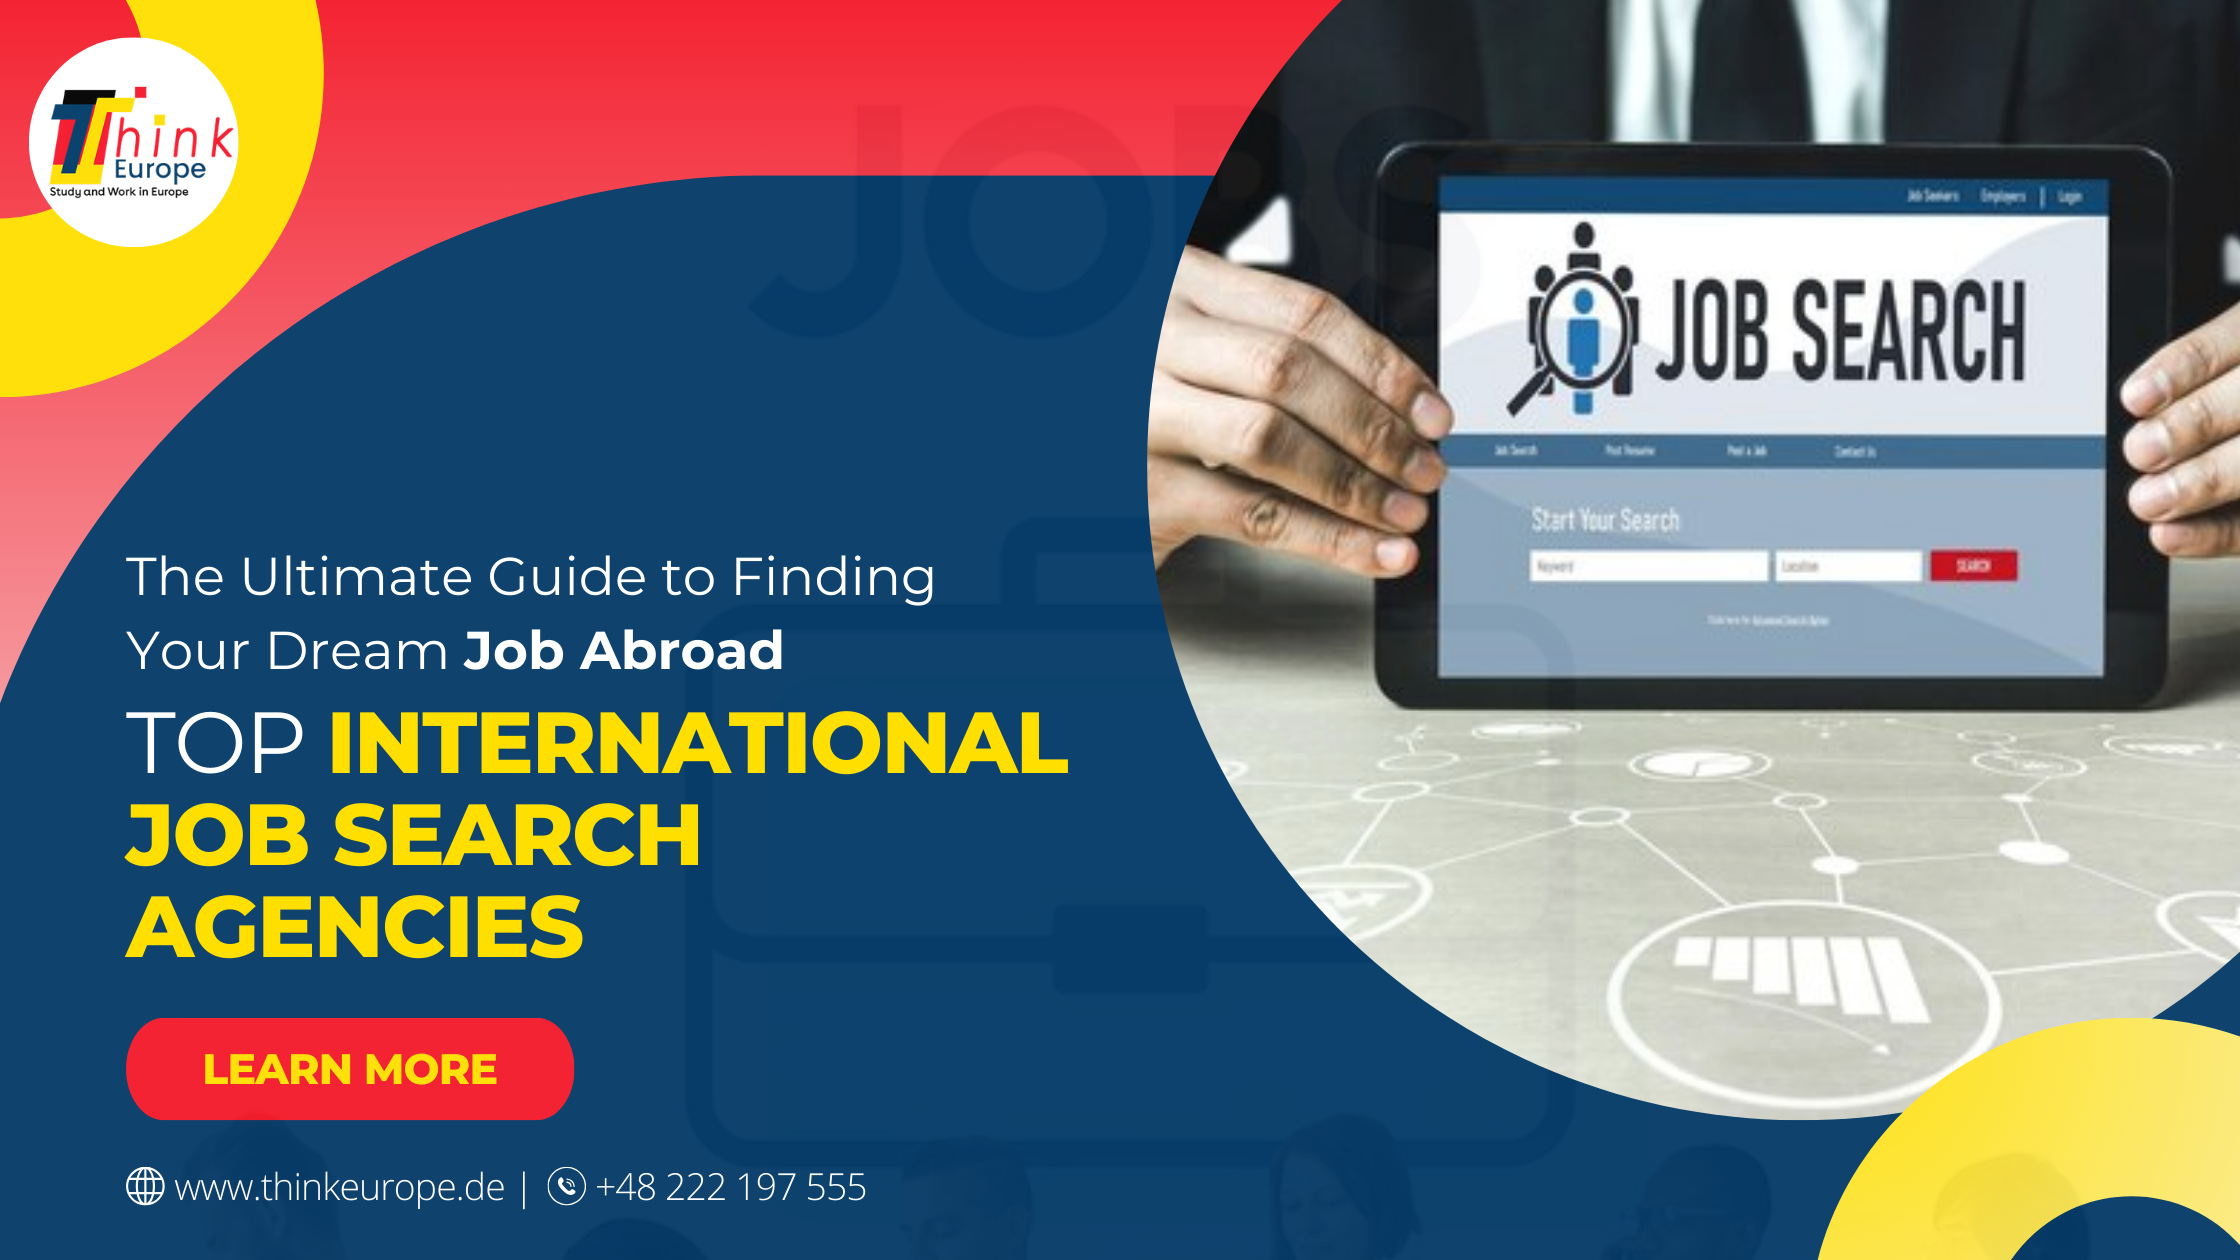 The Ultimate Guide to Finding Your Dream Job Abroad: Top International Job Search Agencies